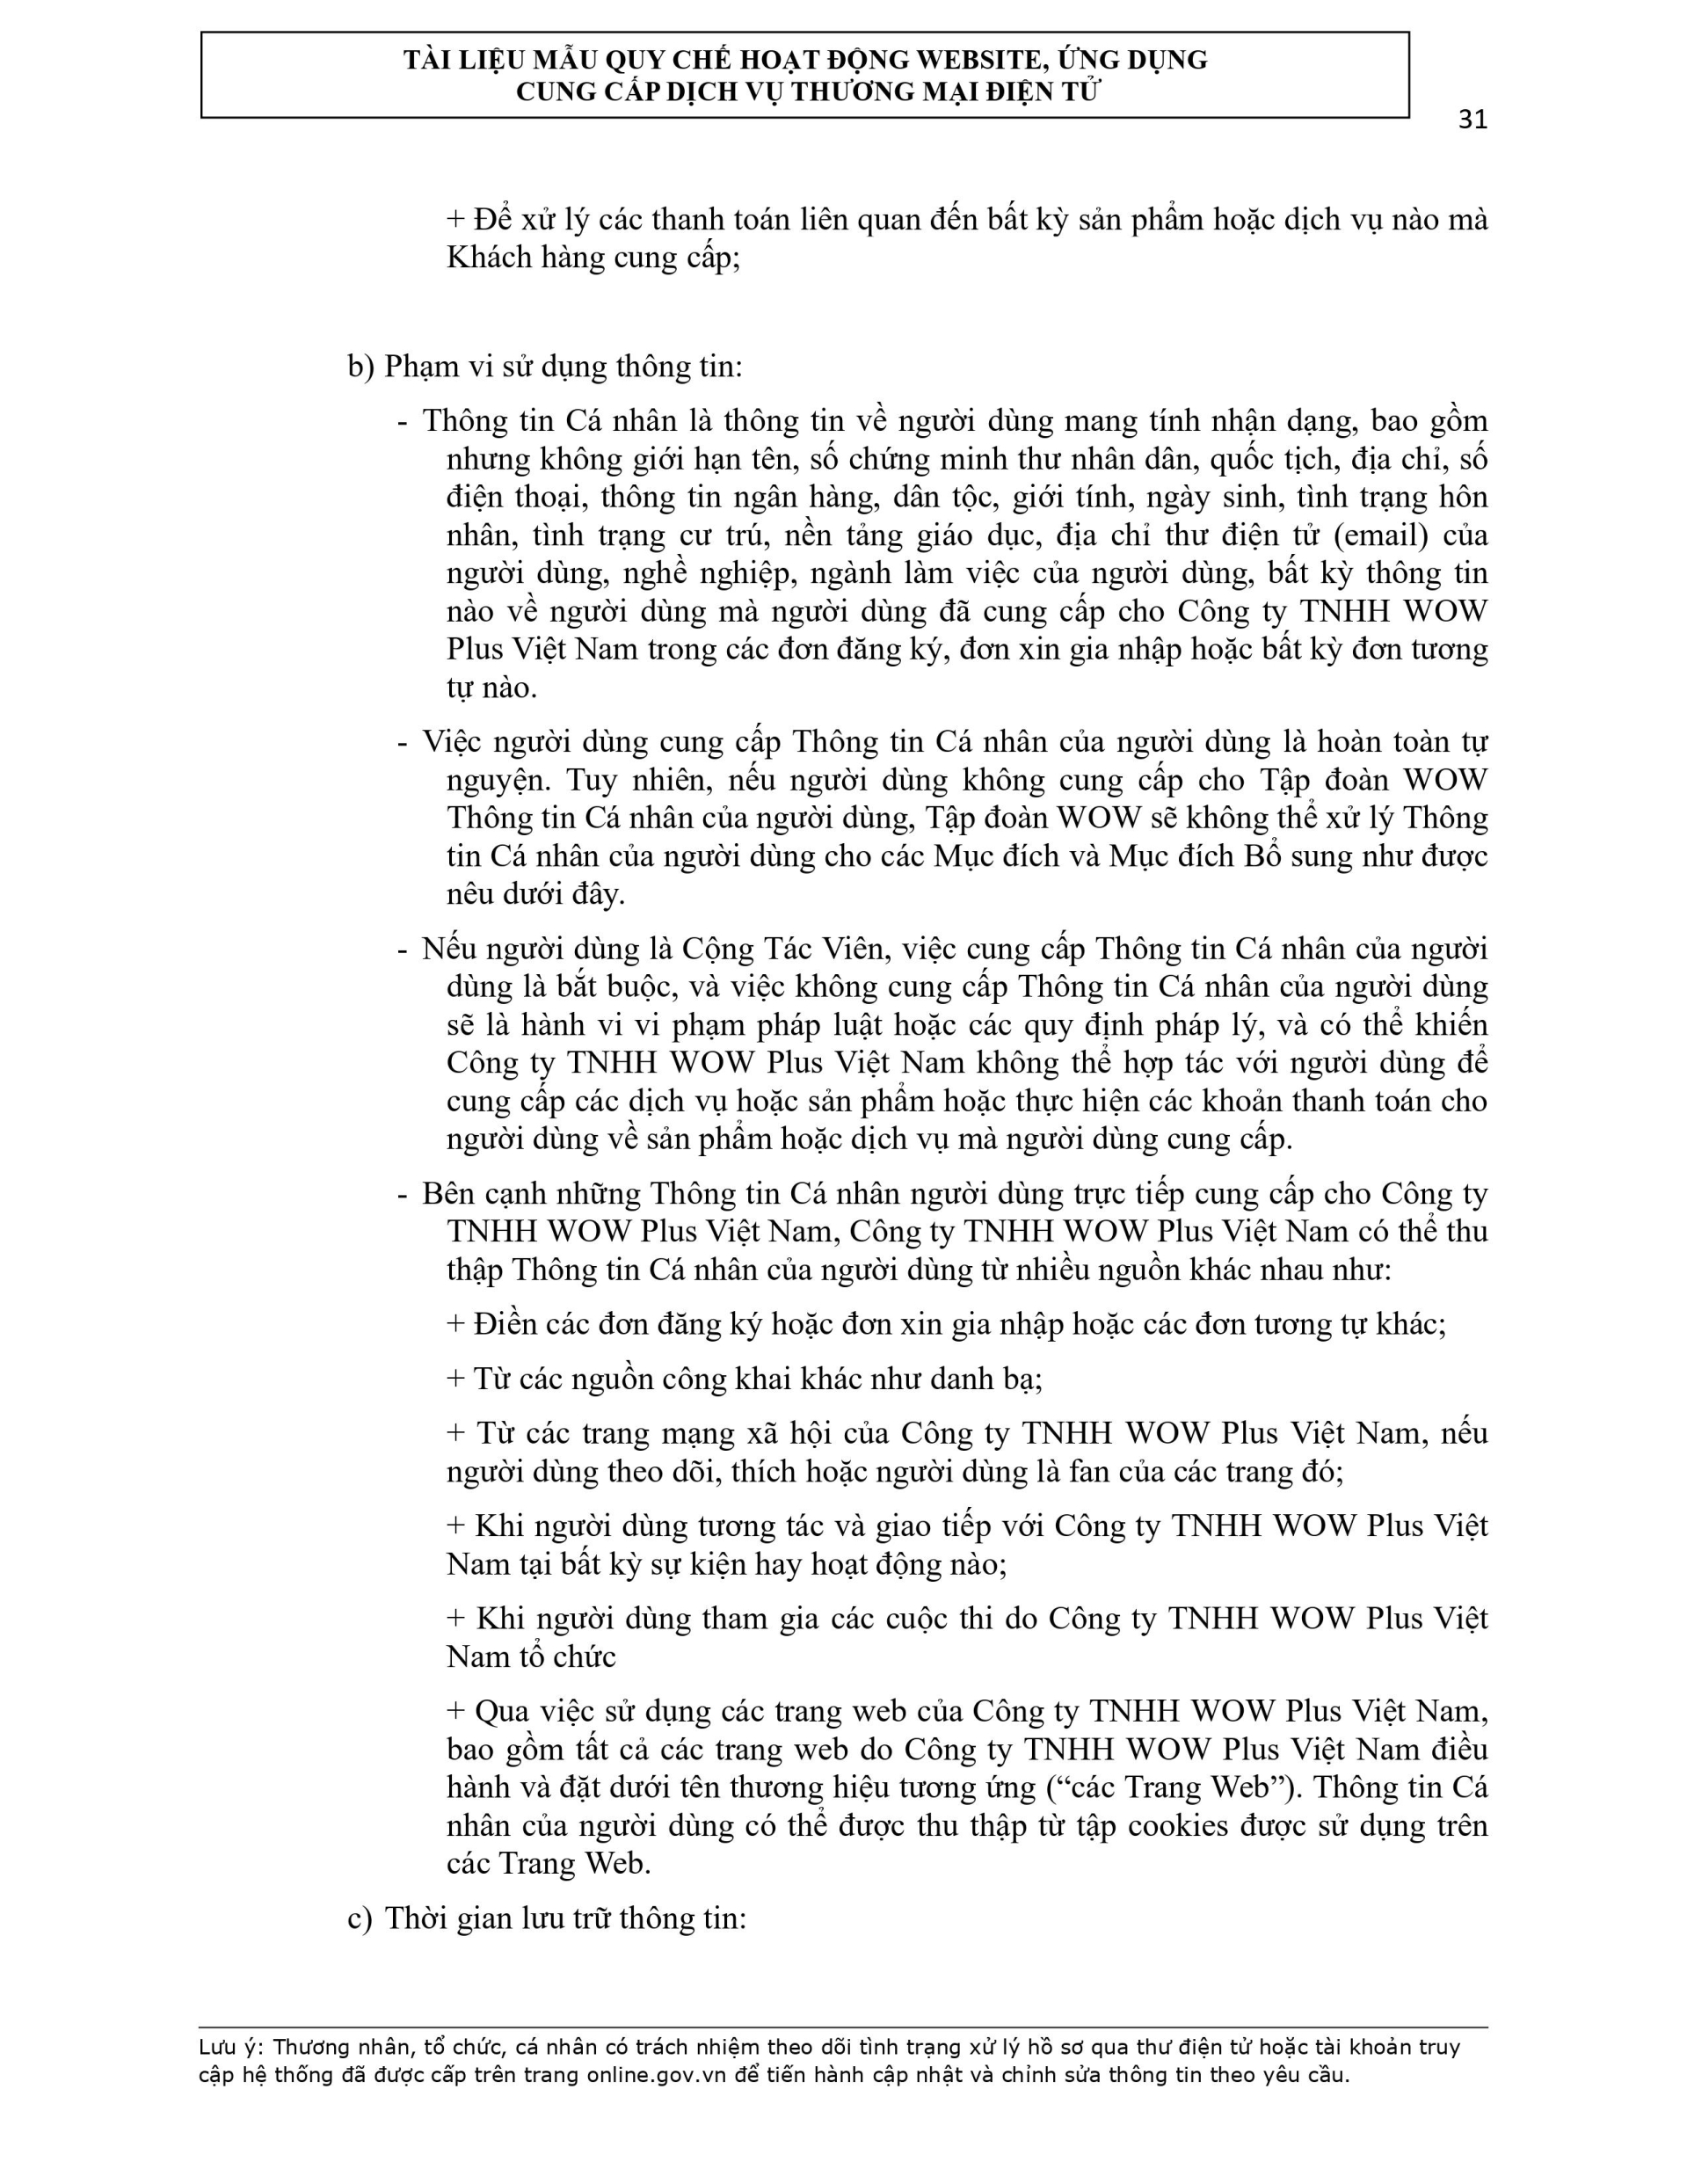 quy-che-hoat-dong-ung-dung-wow-page-0031